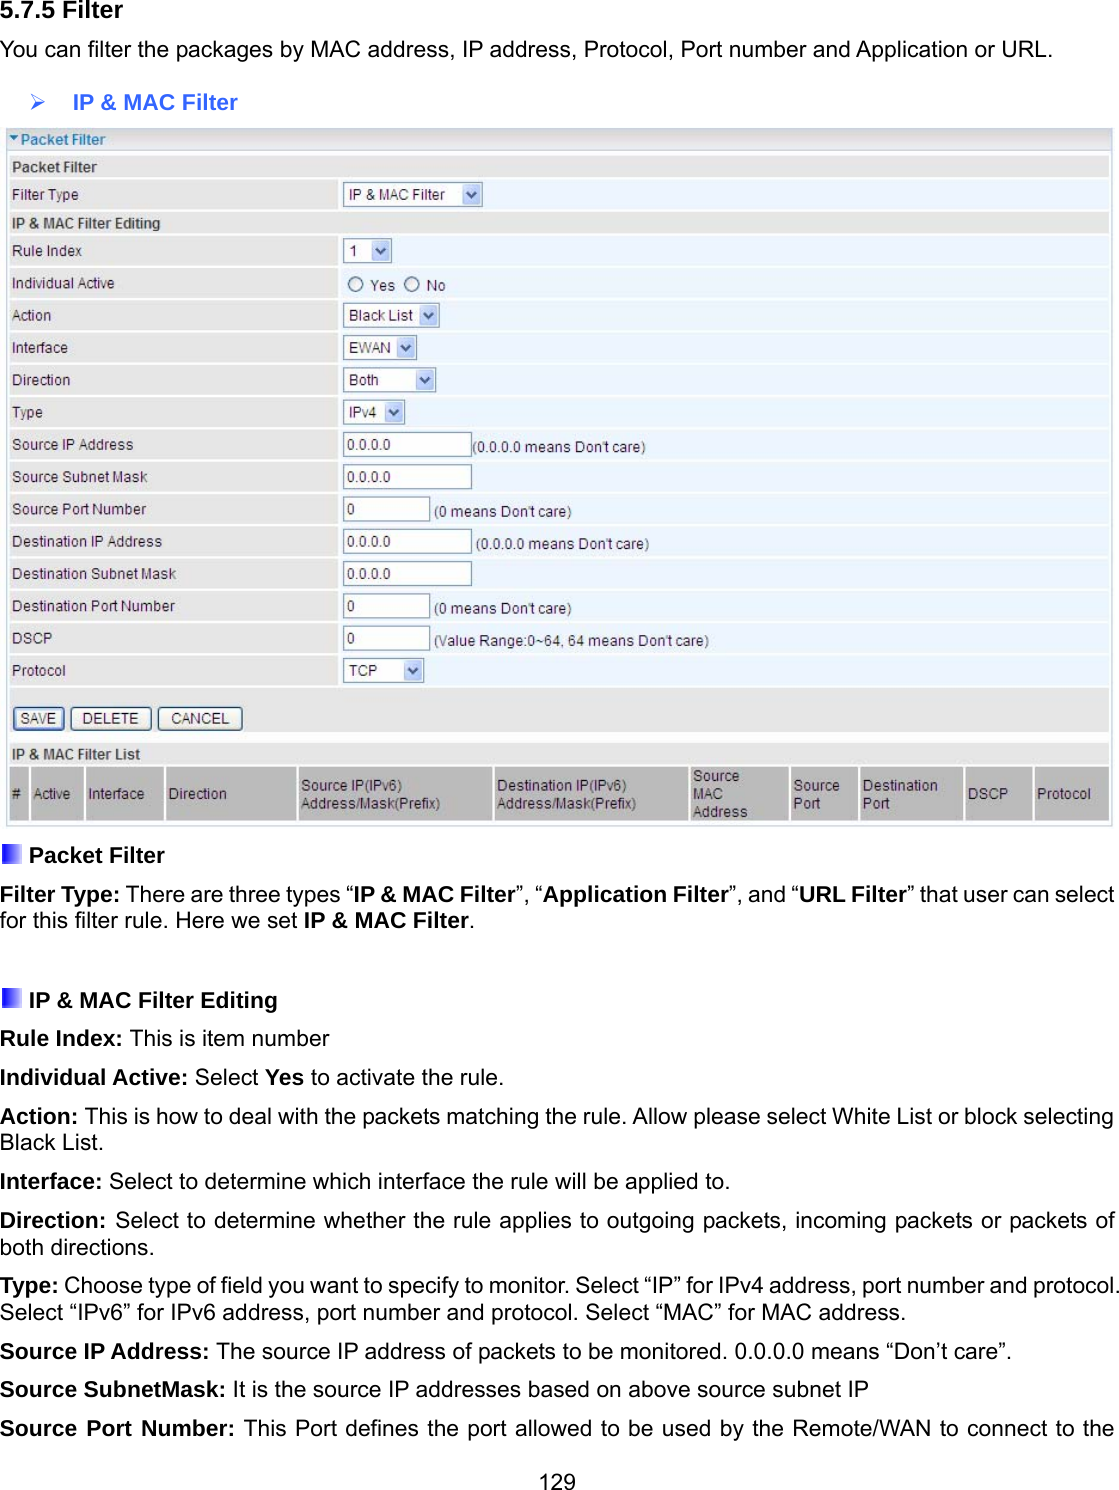 129 5.7.5 Filter You can filter the packages by MAC address, IP address, Protocol, Port number and Application or URL.    IP &amp; MAC Filter   Packet Filter Filter Type: There are three types “IP &amp; MAC Filter”, “Application Filter”, and “URL Filter” that user can select for this filter rule. Here we set IP &amp; MAC Filter.   IP &amp; MAC Filter Editing Rule Index: This is item number Individual Active: Select Yes to activate the rule. Action: This is how to deal with the packets matching the rule. Allow please select White List or block selecting Black List. Interface: Select to determine which interface the rule will be applied to. Direction: Select to determine whether the rule applies to outgoing packets, incoming packets or packets of both directions. Type: Choose type of field you want to specify to monitor. Select “IP” for IPv4 address, port number and protocol. Select “IPv6” for IPv6 address, port number and protocol. Select “MAC” for MAC address.  Source IP Address: The source IP address of packets to be monitored. 0.0.0.0 means “Don’t care”. Source SubnetMask: It is the source IP addresses based on above source subnet IP Source Port Number: This Port defines the port allowed to be used by the Remote/WAN to connect to the 